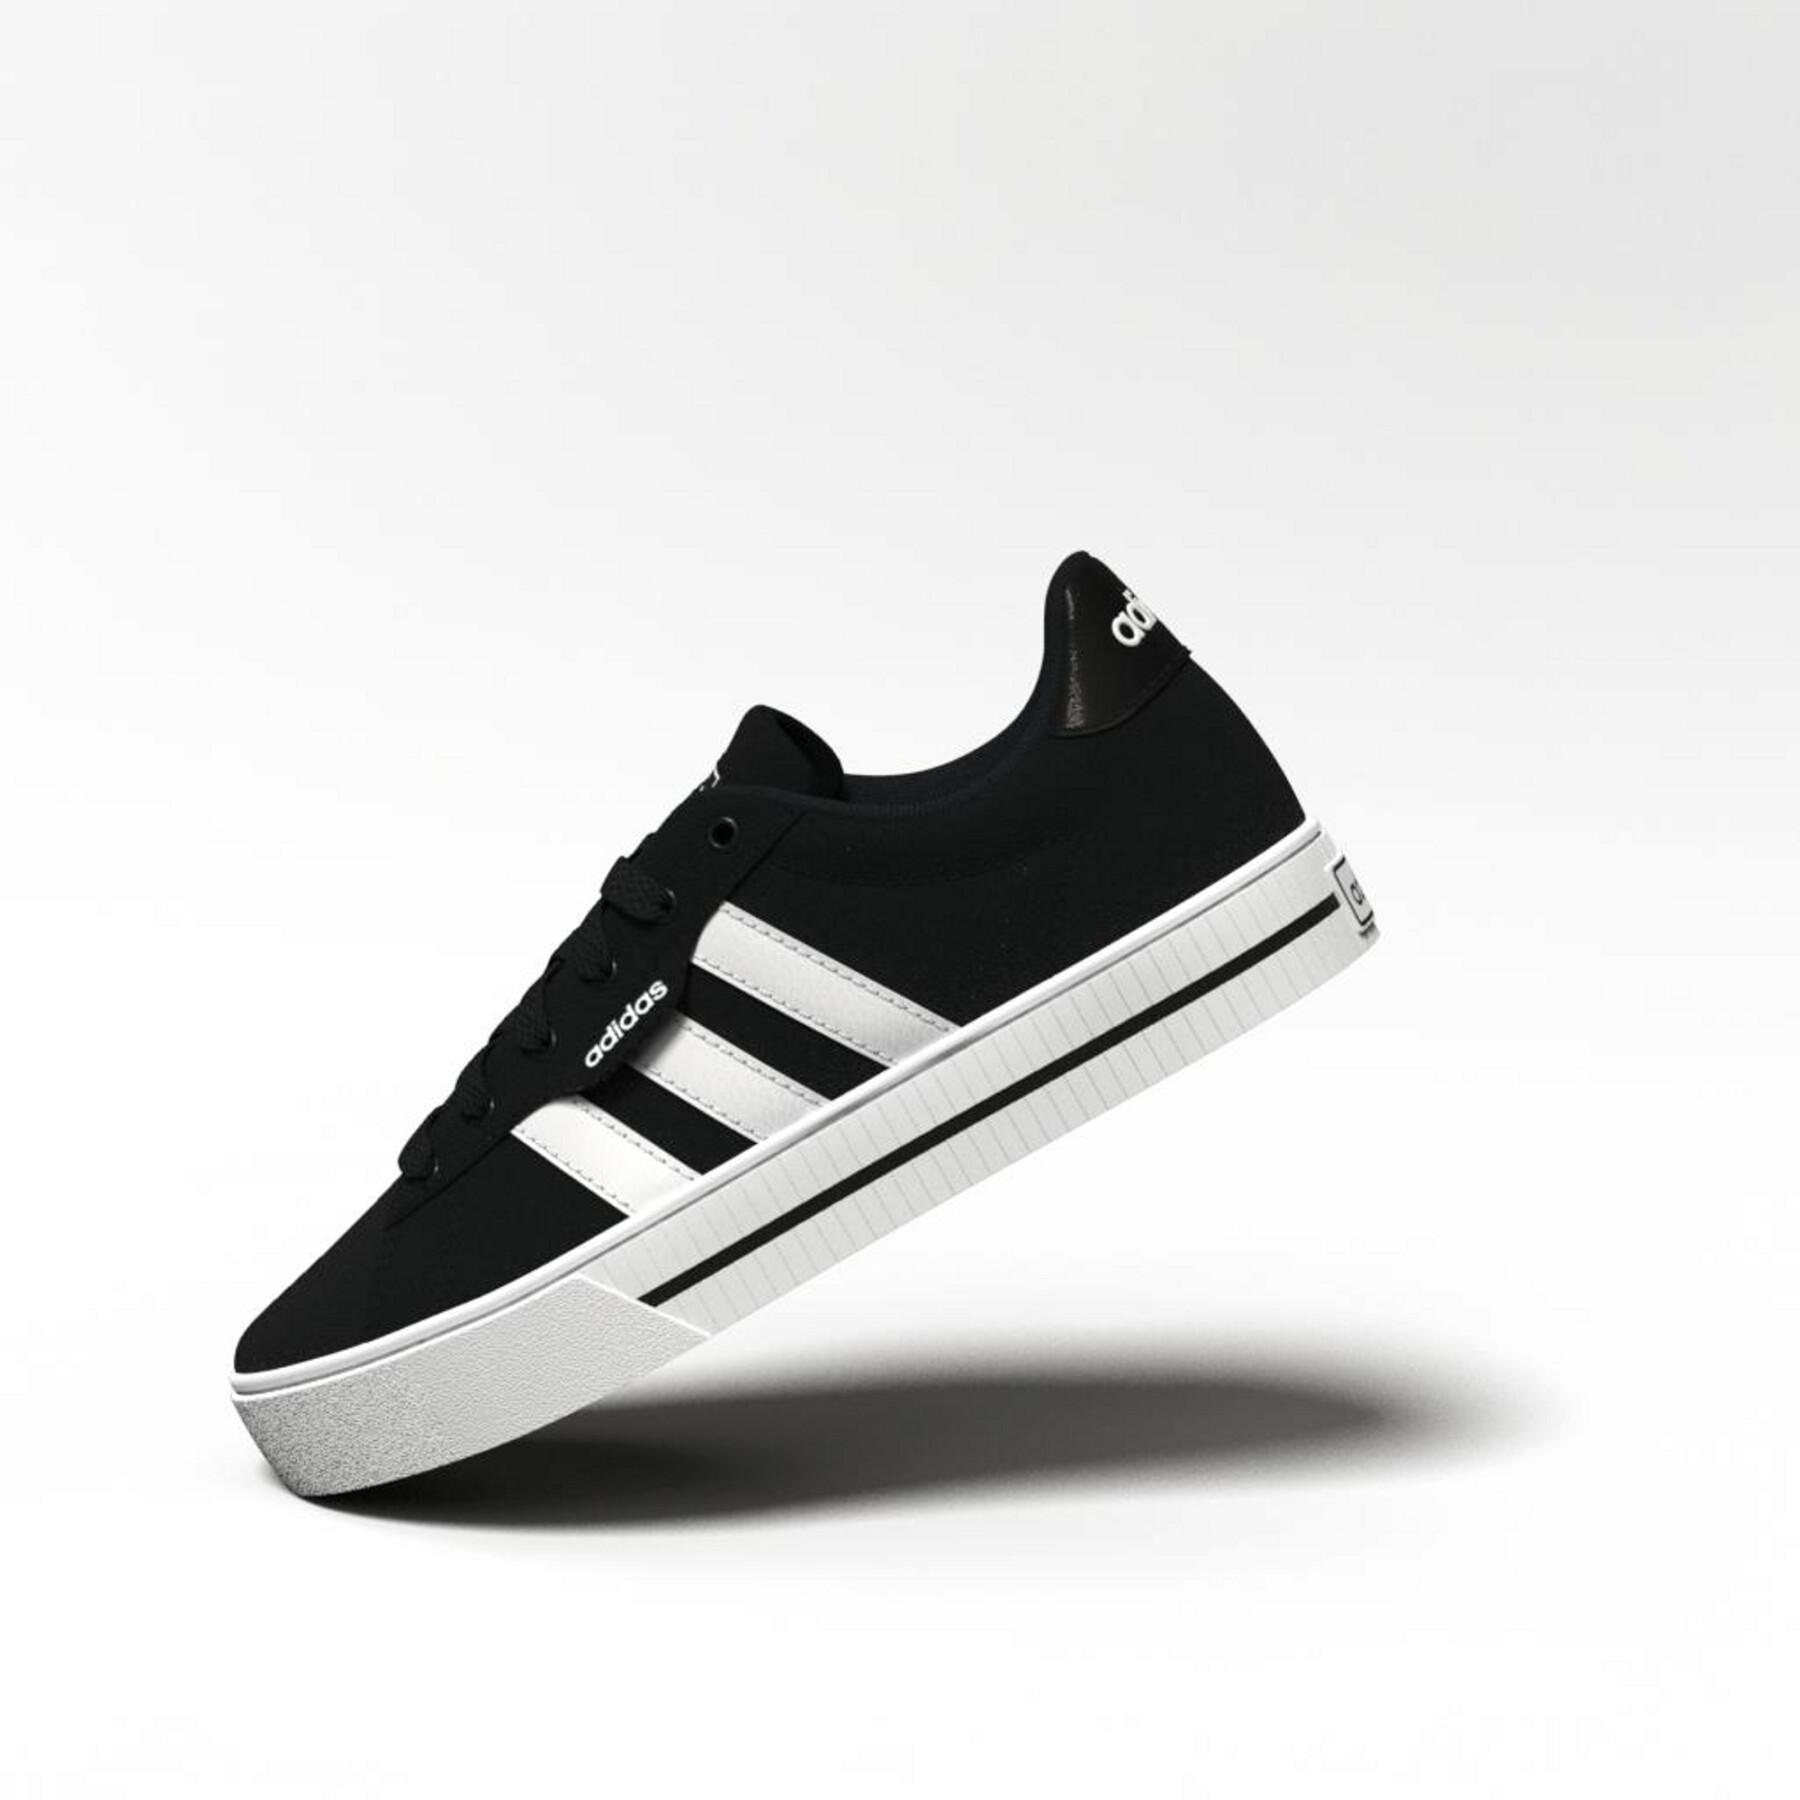 Chaussures kid adidas Daily 3.0